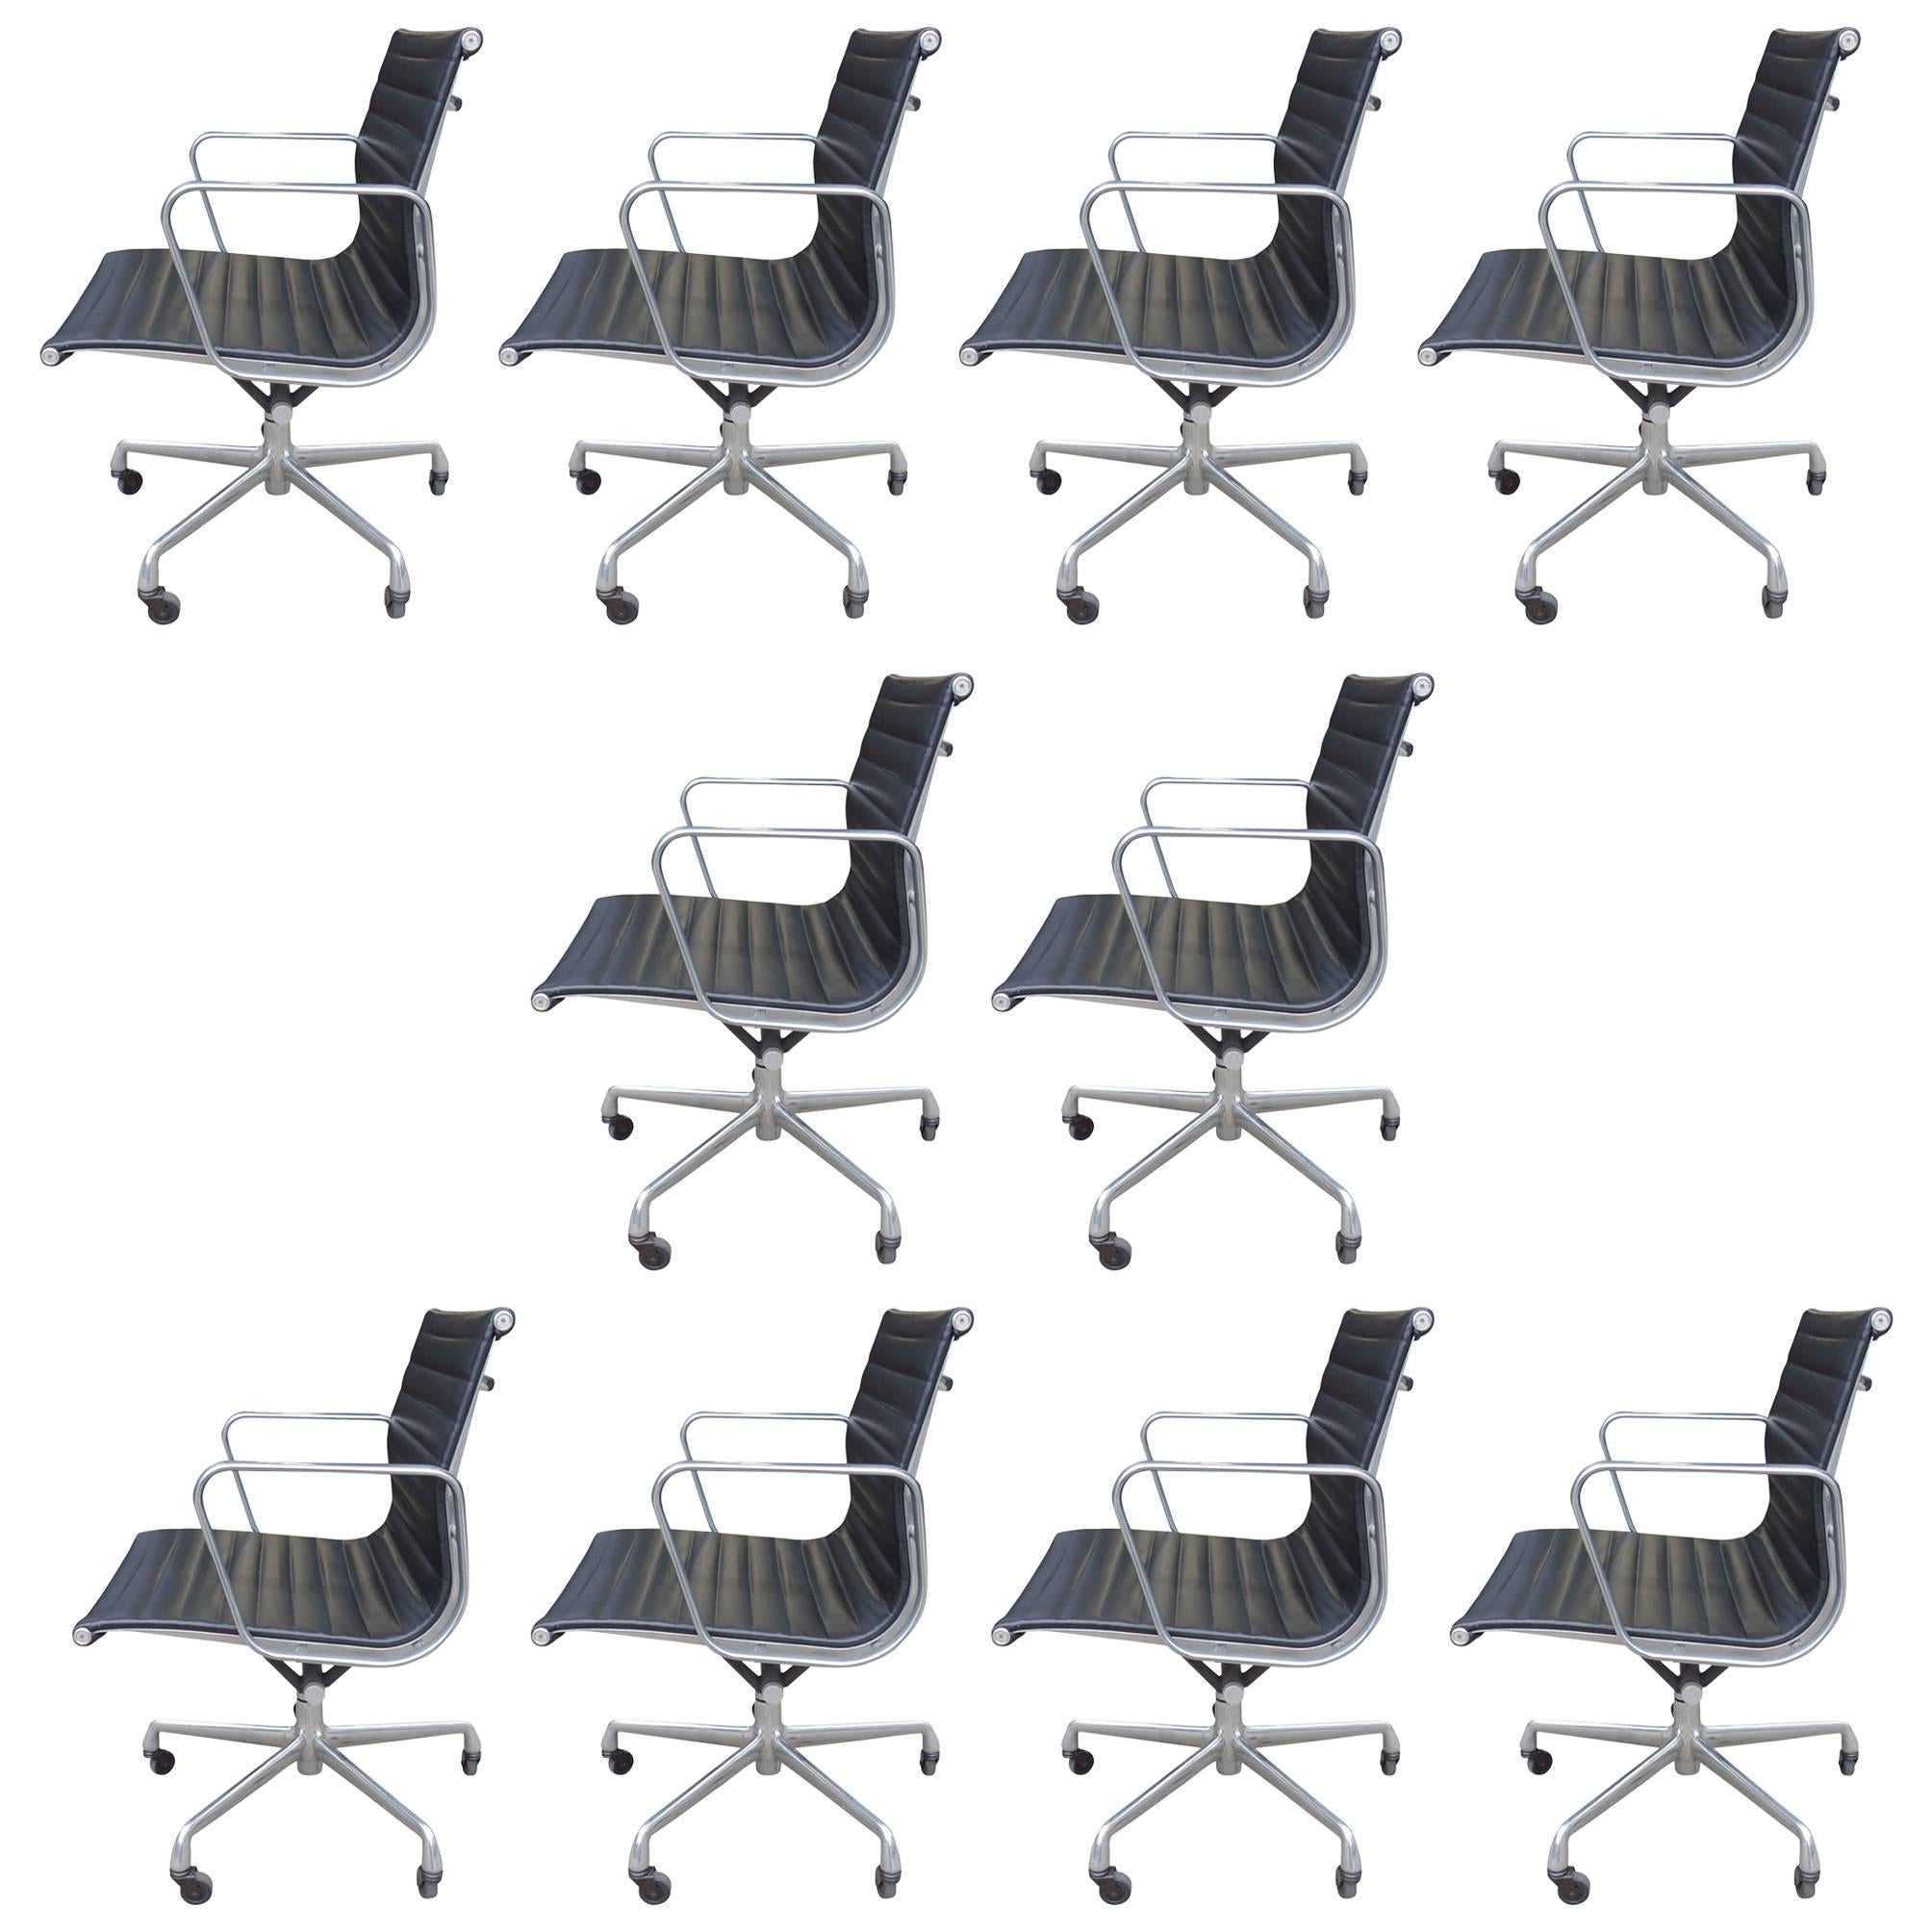 For your consideration are up to 5 aluminium group chairs in black leather designed by Eames for Herman Miller. All in good original condition showing expected wear consistent with age and use. With tilt and height adjustment.